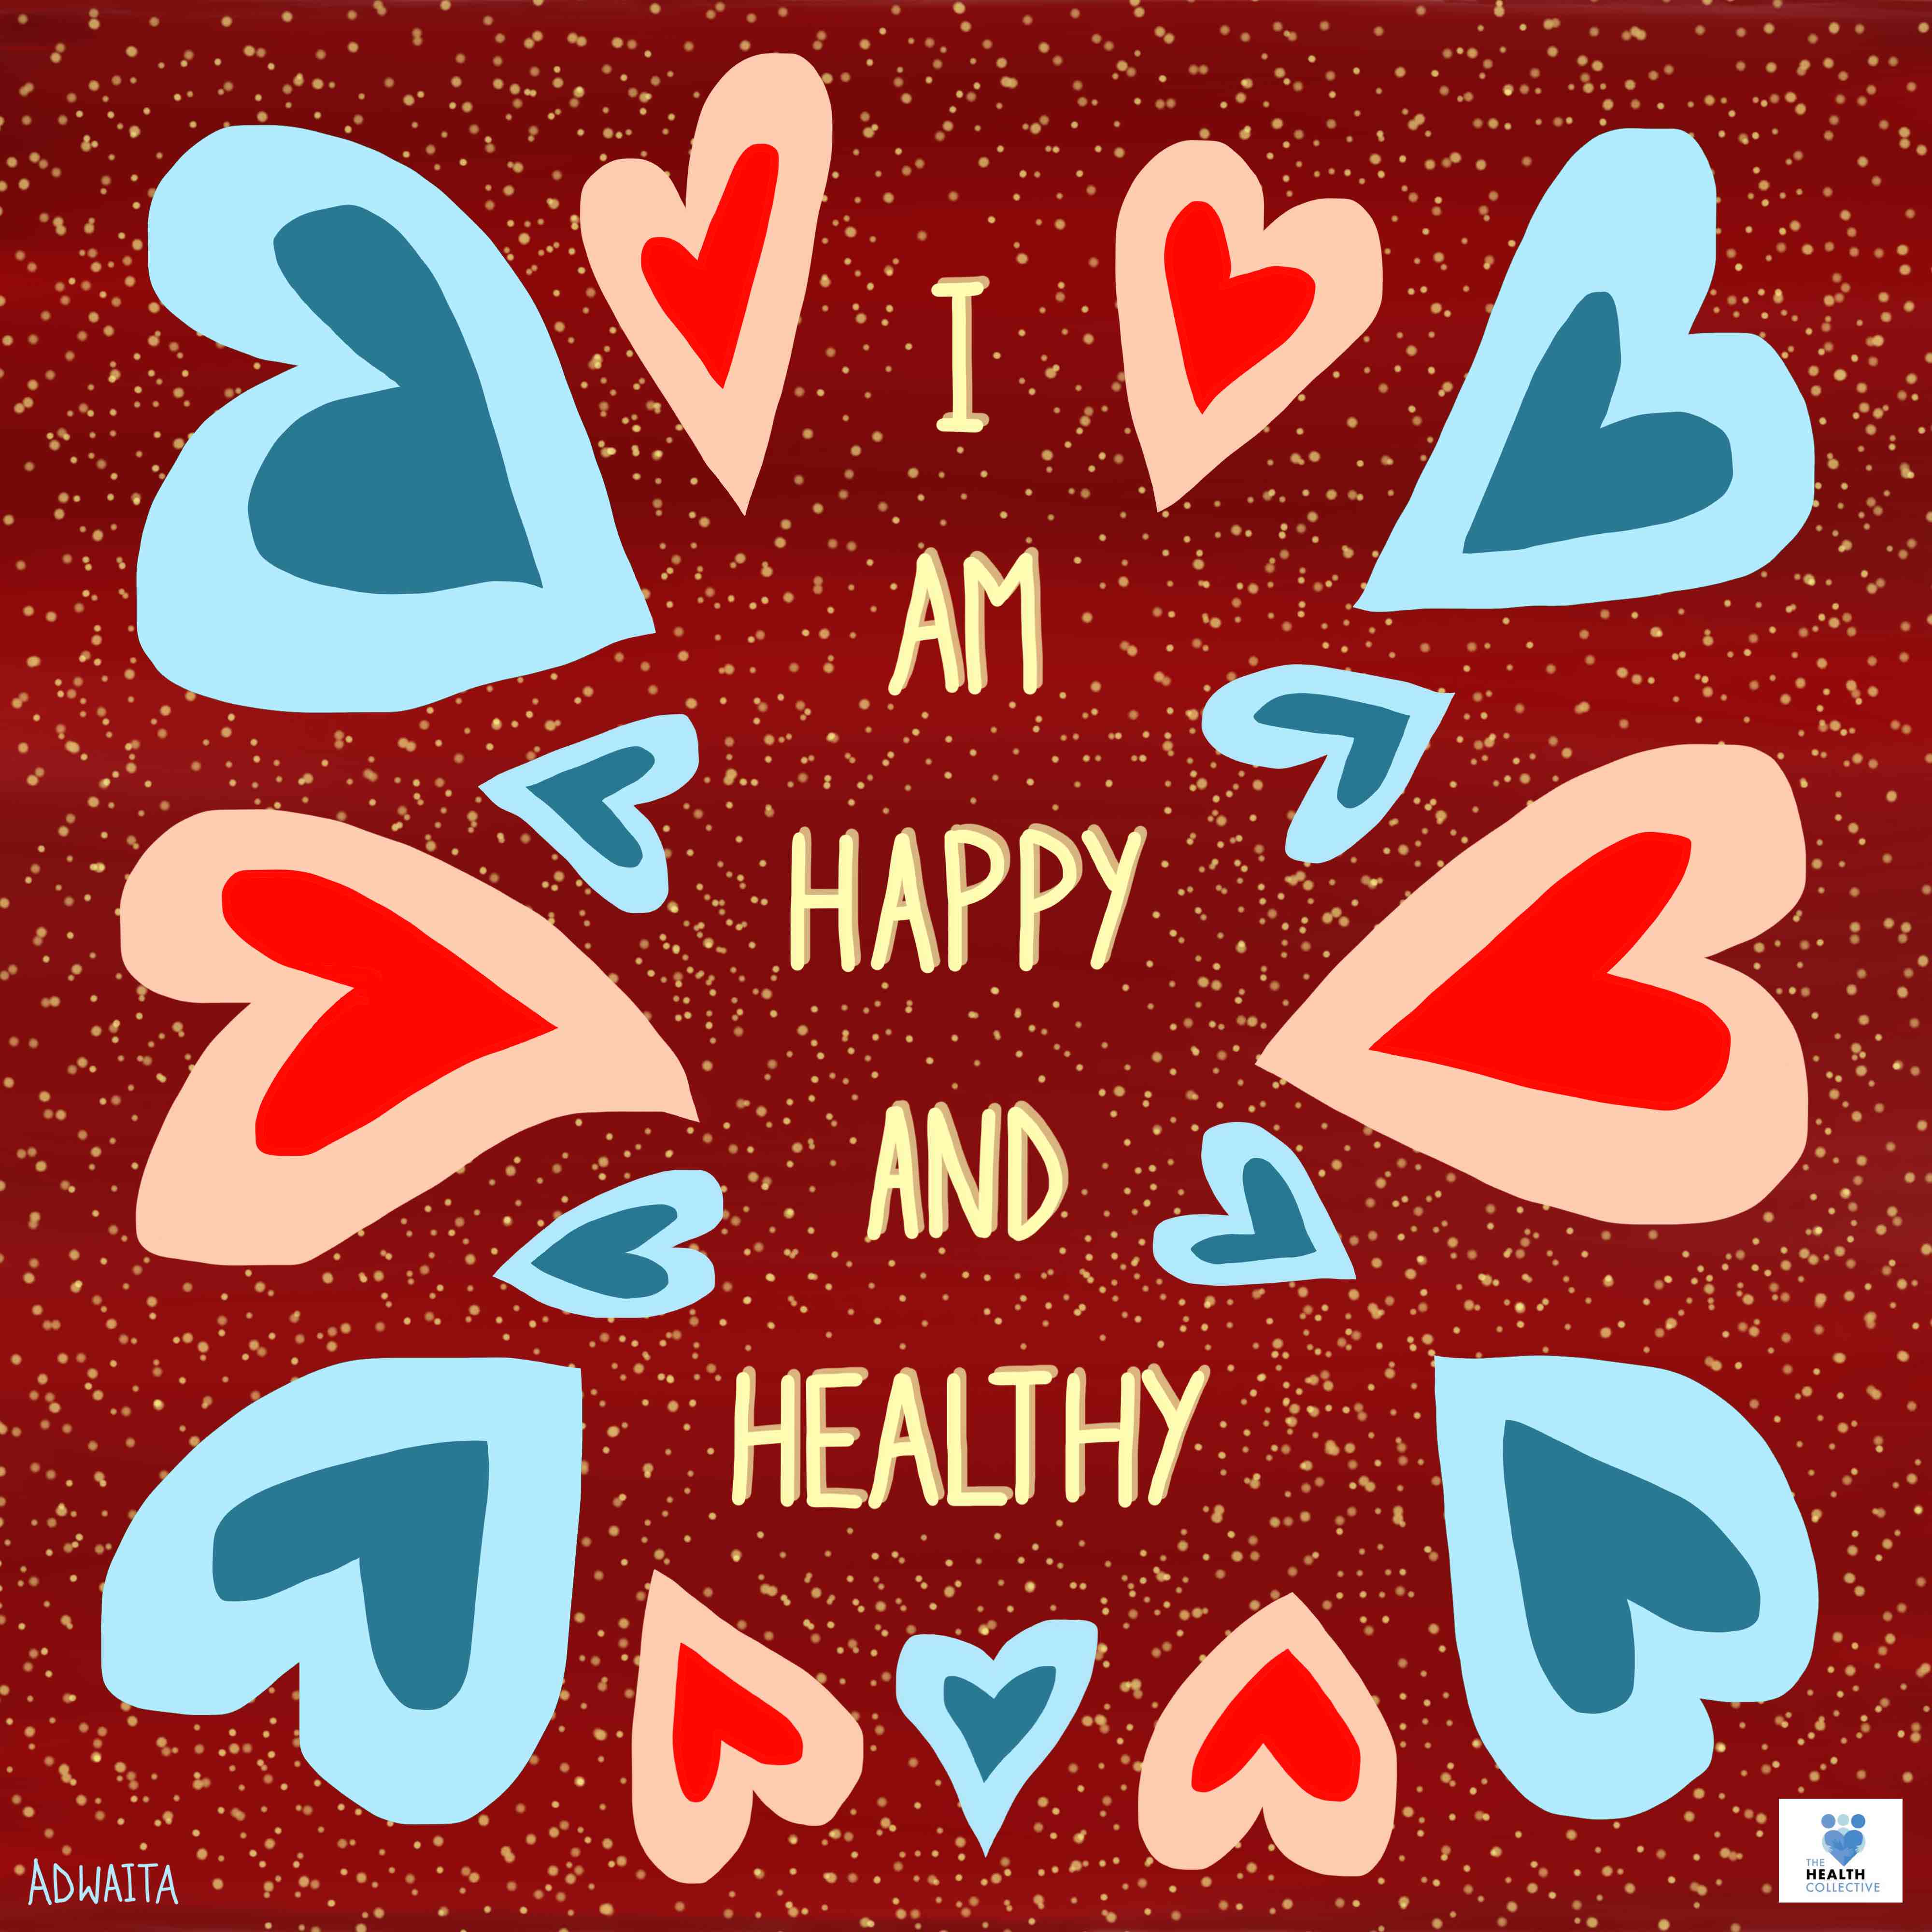 Happy and Healthy